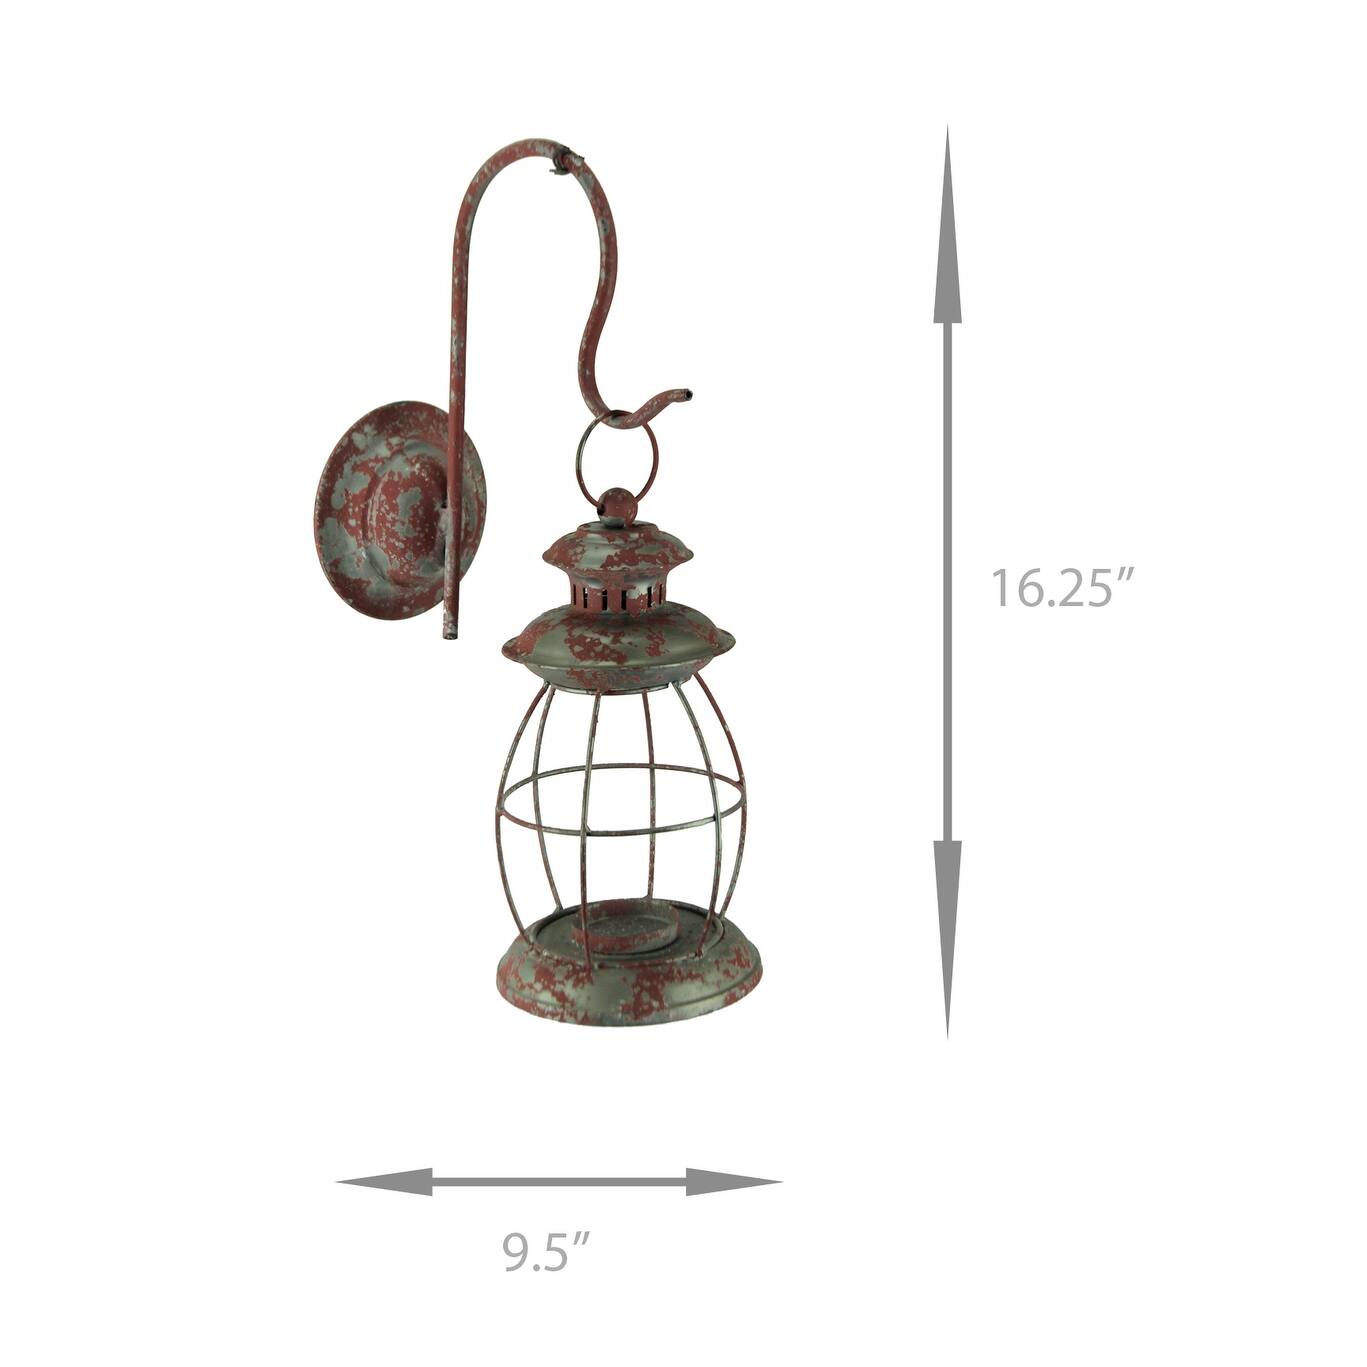 Rustic Distressed Metal Wall Mounted Vintage Lantern Hanging Candle - 16.25 X 9.5 X 5 inches